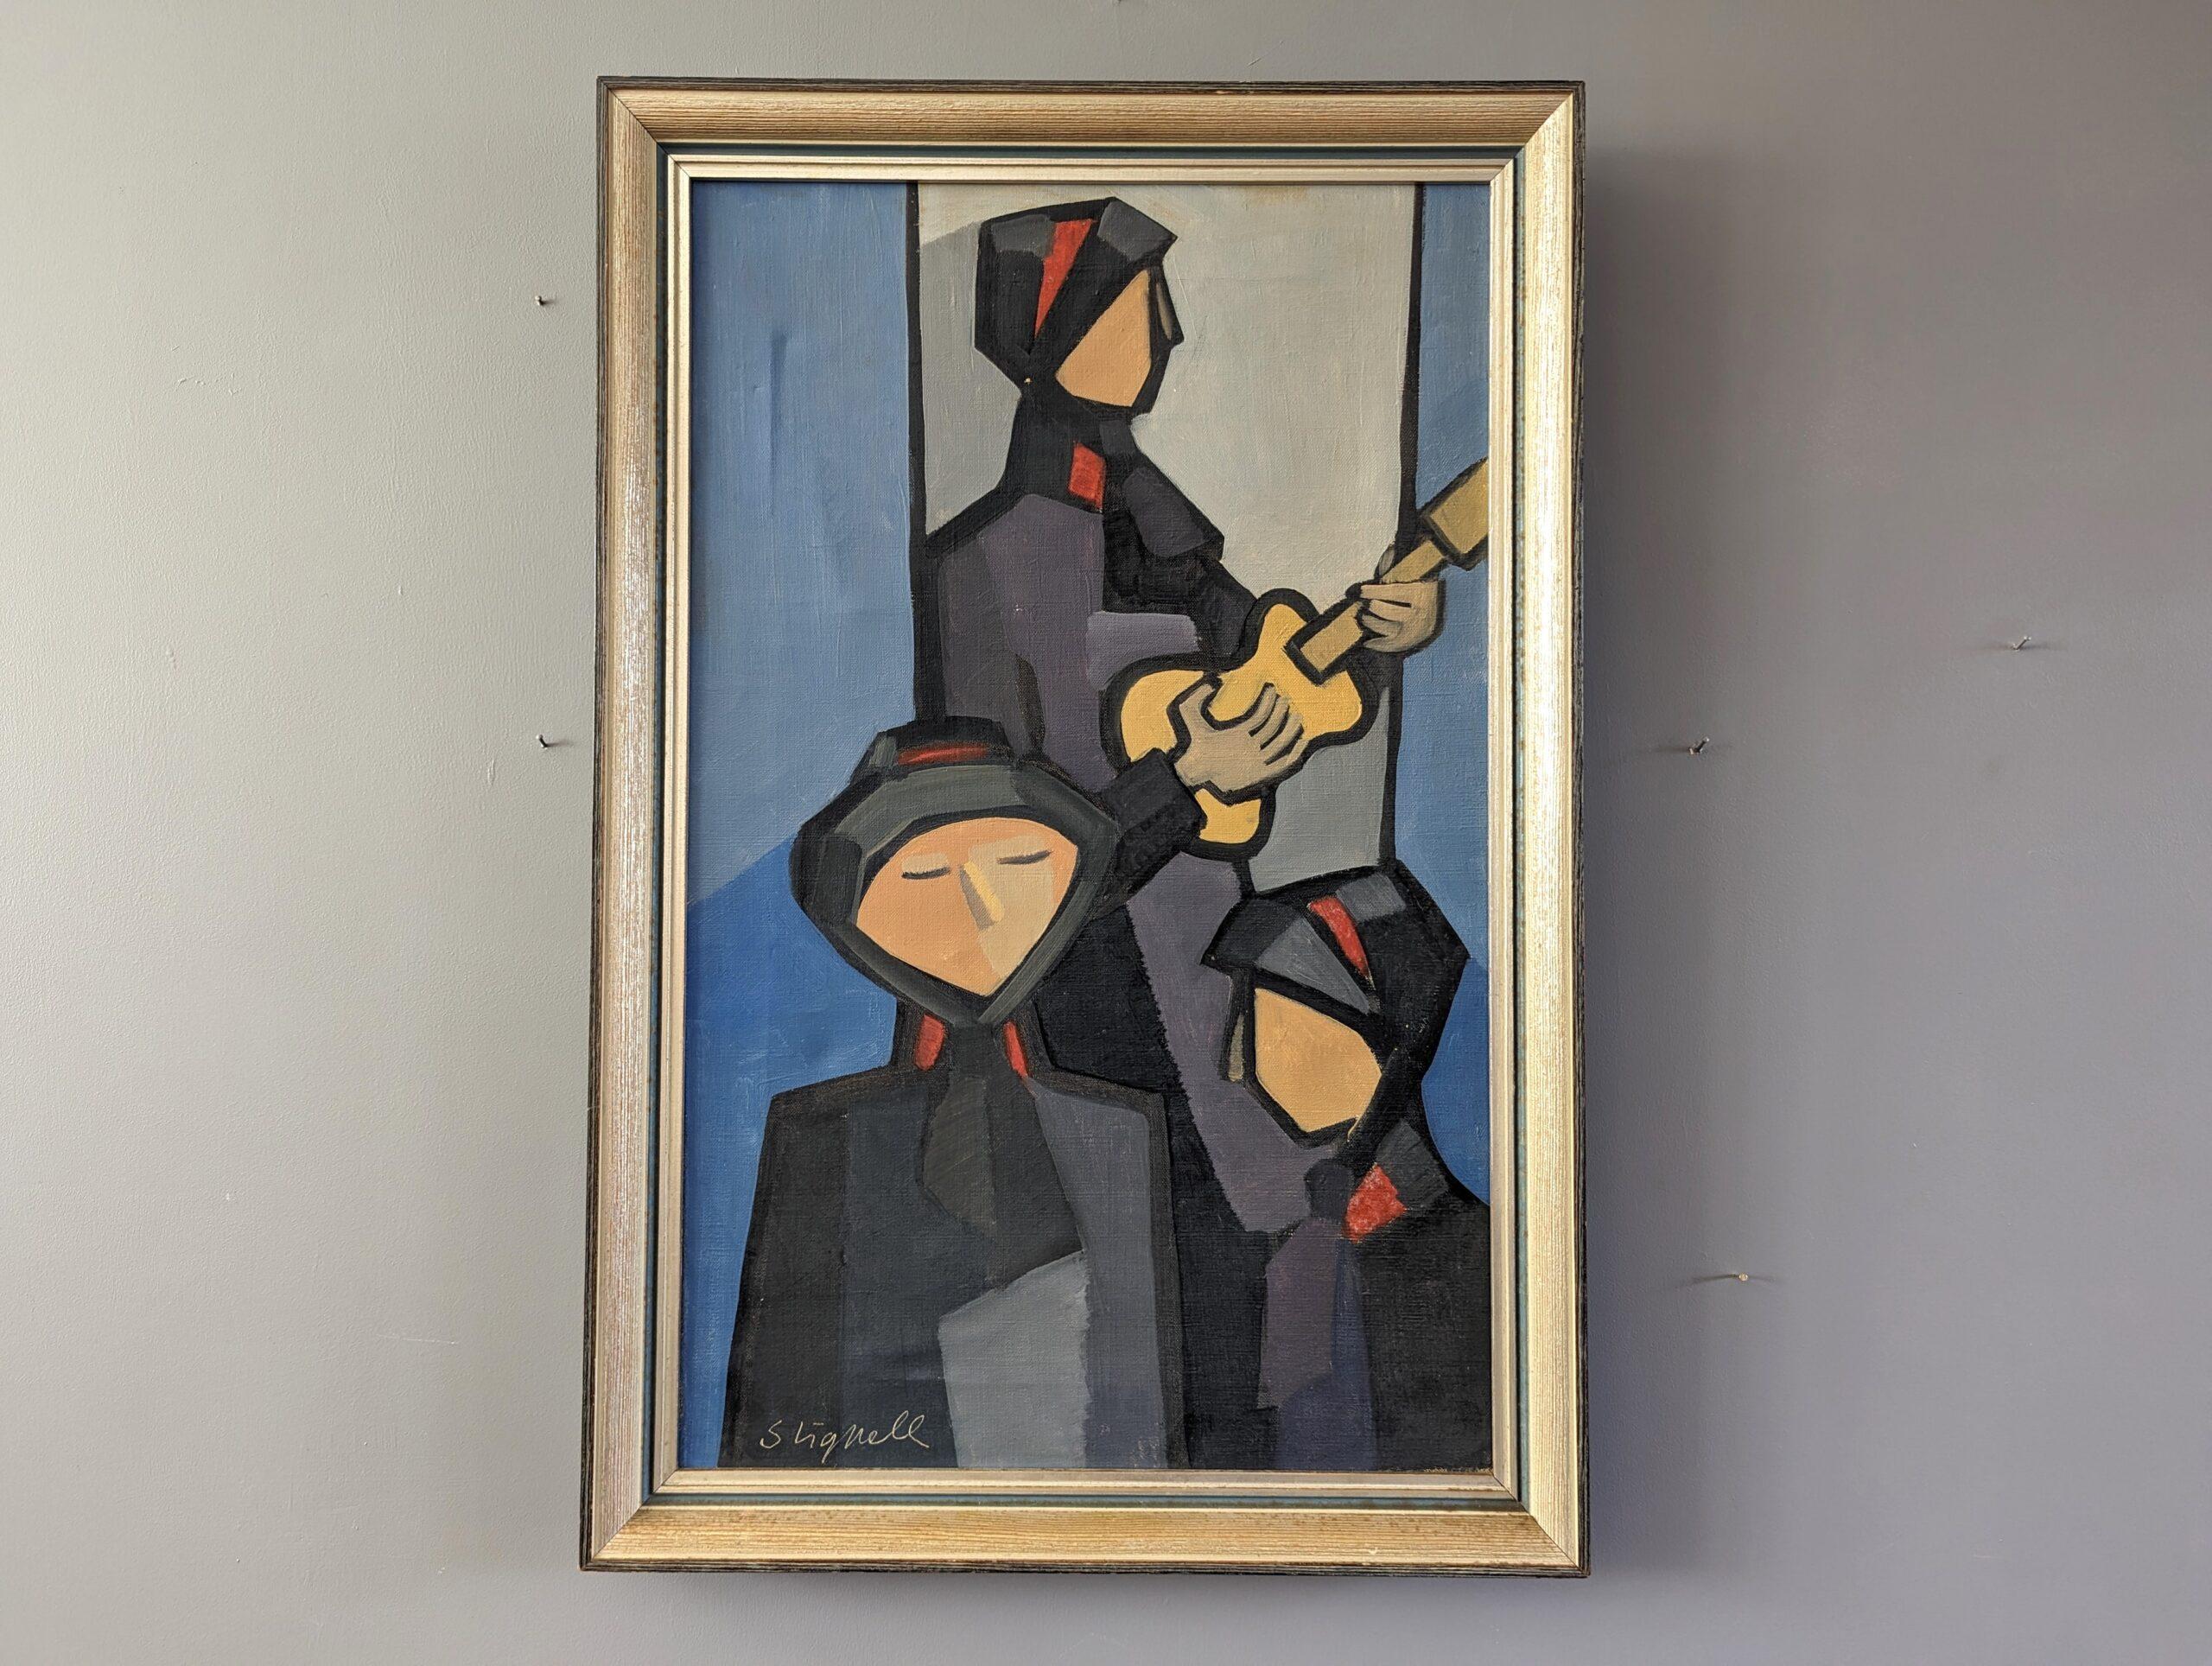 THREE MUSICIANS 
Size: 63 x 42 cm (including frame)
Oil on Canvas

A striking mid-century figurative composition, executed in oil onto canvas.

Three figures are depicted, presumably musicians. The central figure stands prominently, holding a